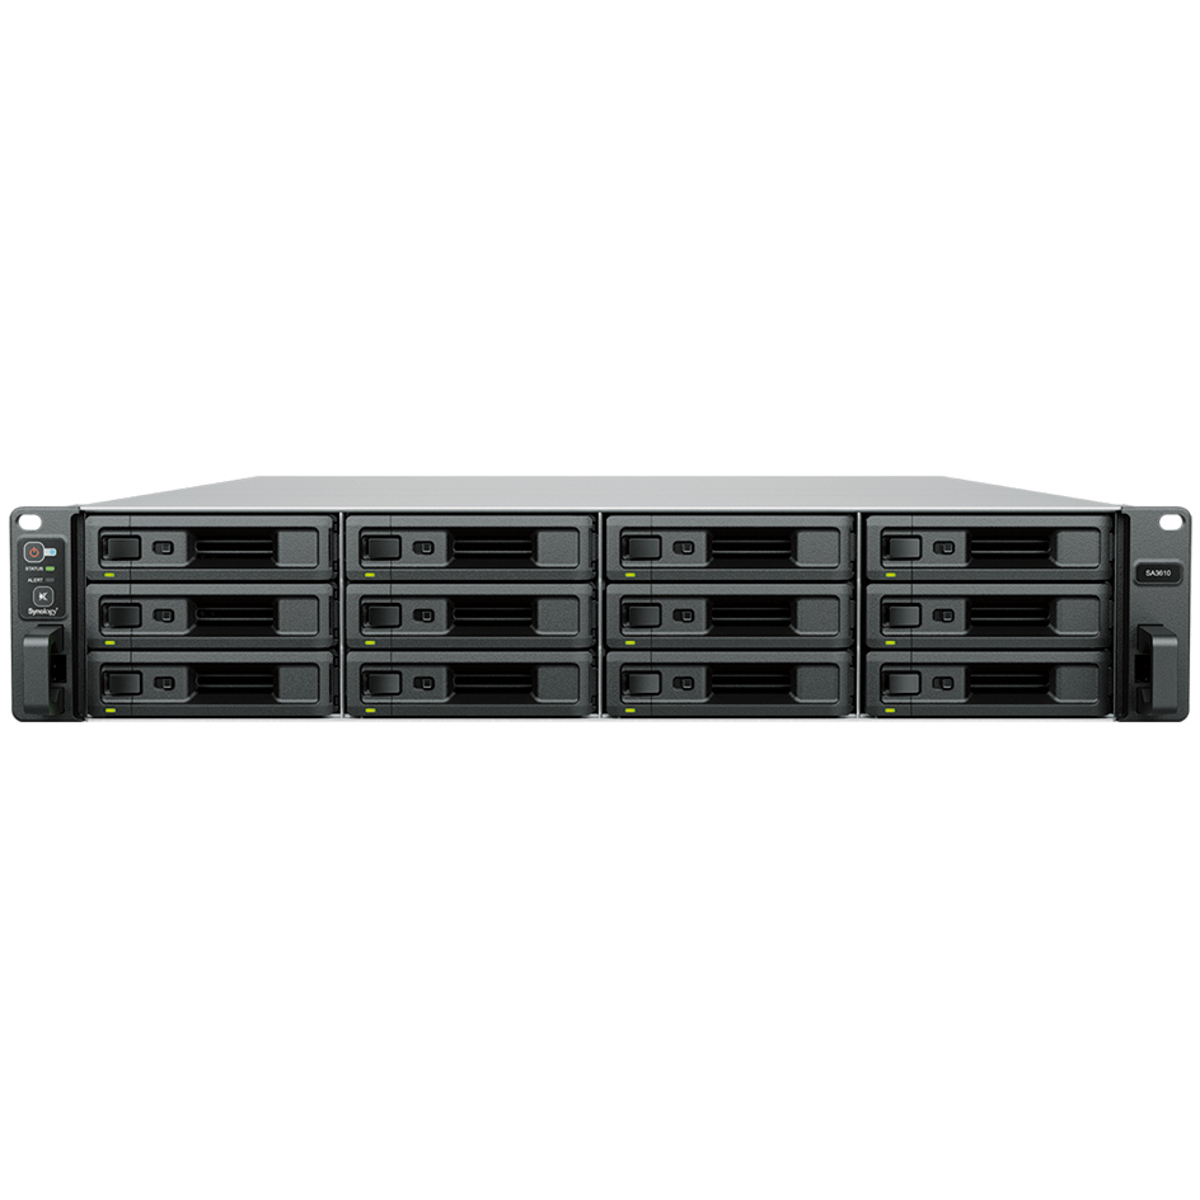 Synology RackStation SA3610 20tb 12-Bay RackMount Large Business / Enterprise NAS - Network Attached Storage Device 10x2tb Sandisk Ultra 3D SDSSDH3-2T00 2.5 560/520MB/s SATA 6Gb/s SSD CONSUMER Class Drives Installed - Burn-In Tested RackStation SA3610